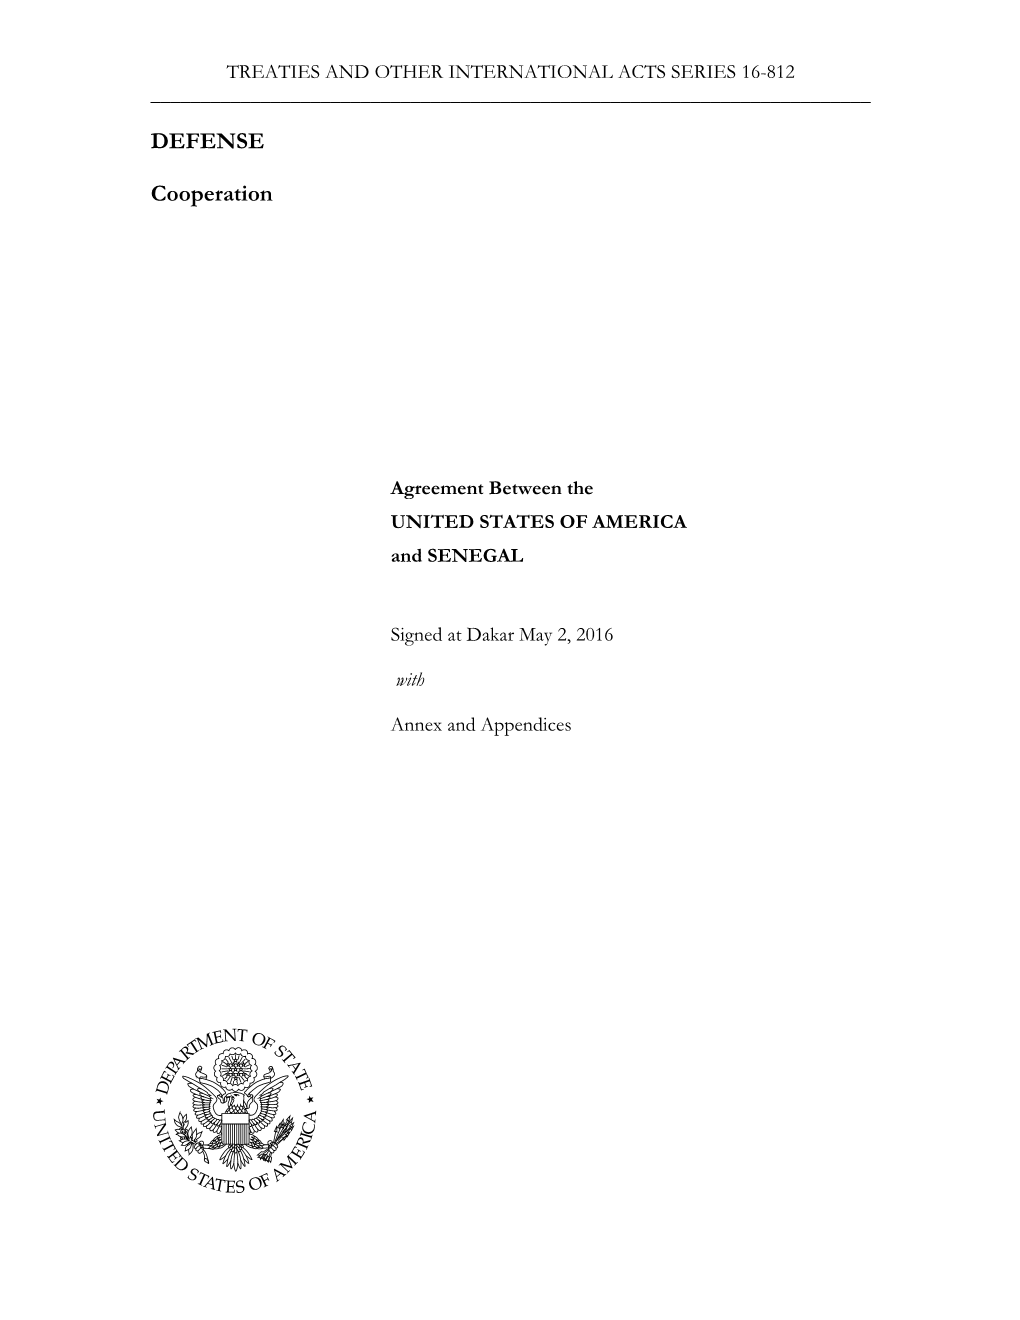 Defense Cooperation, the Status of United States Forces, and Access to and Use of Agreed Facilities and Areas in the Republic of Senegal